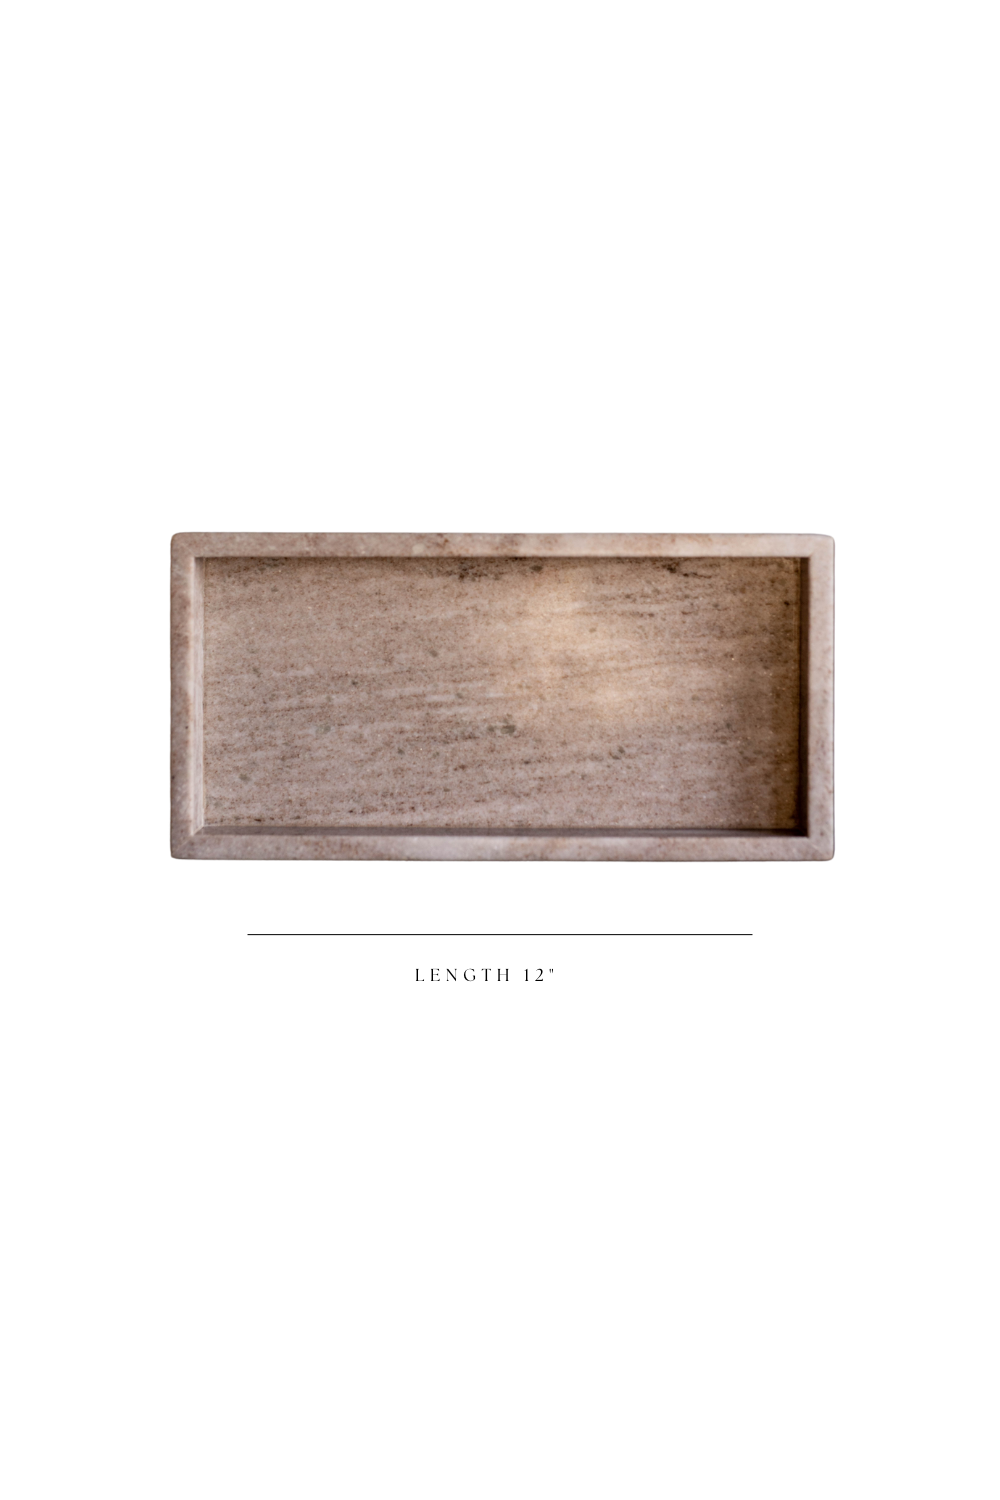 Hand Cut Stone Tray - Luxe B Pampas Grass  Vintage Home Decor Shop Luxe B Co Instagram